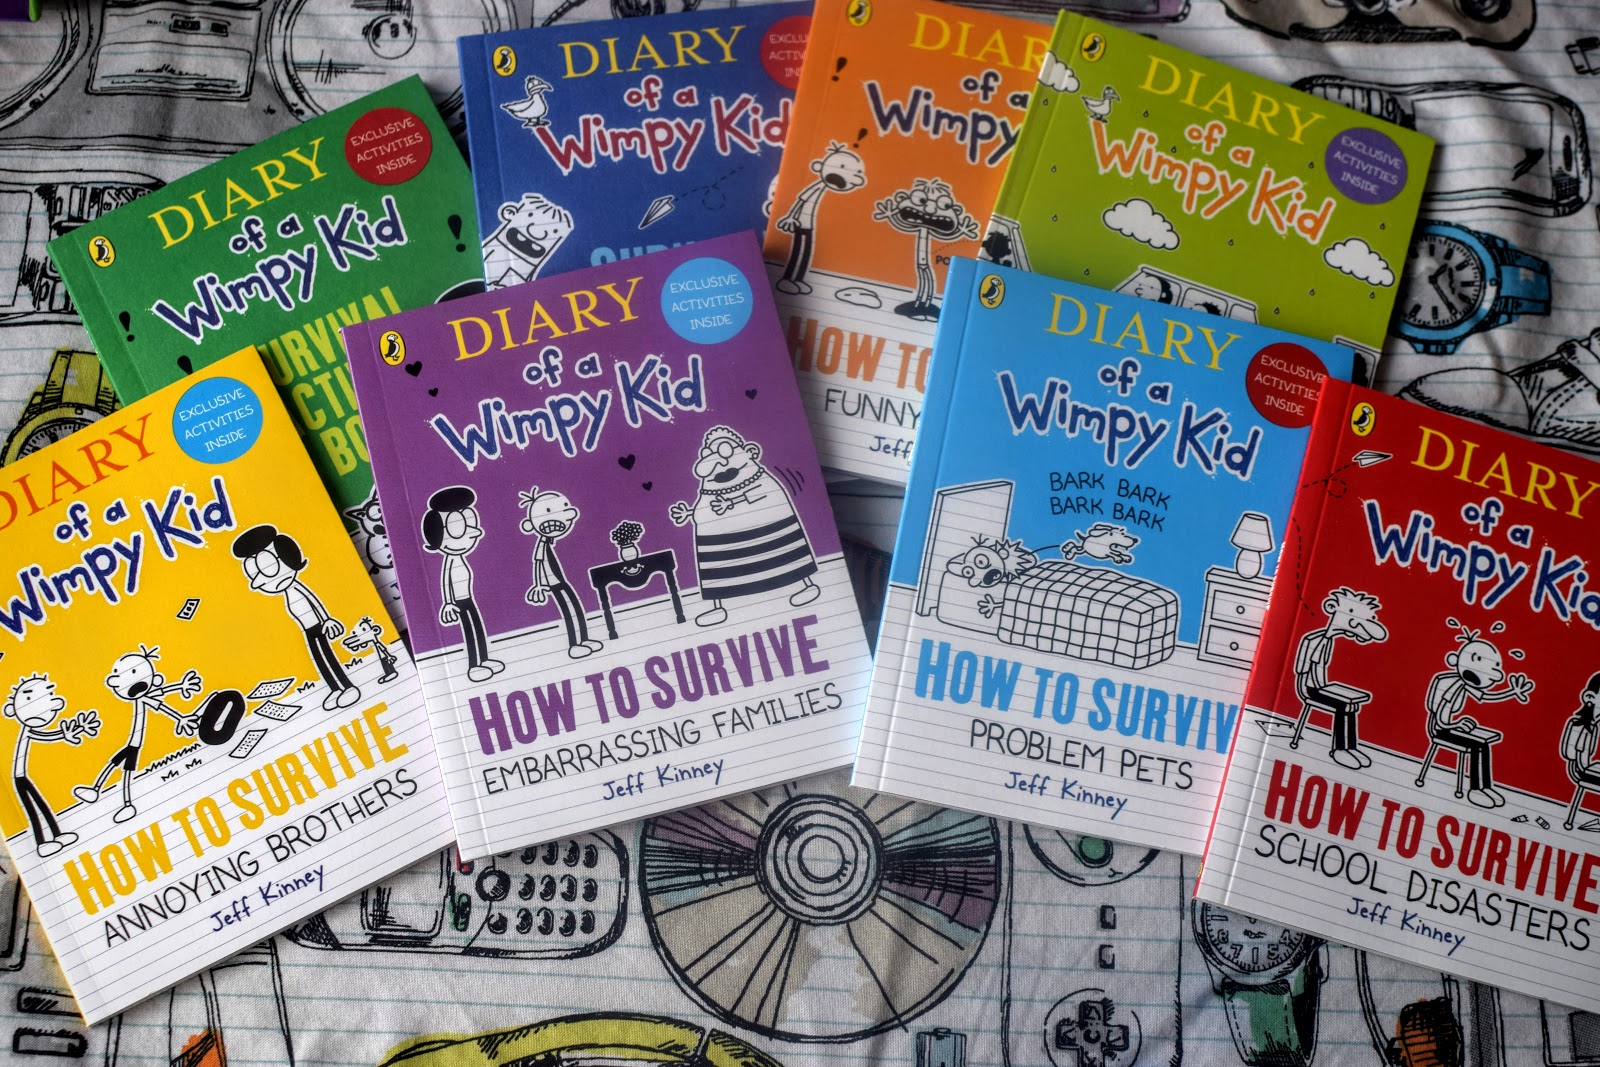 , How to Survive a Broken Arm with Diary of a Wimpy Kids and McDonalds Happy Readers